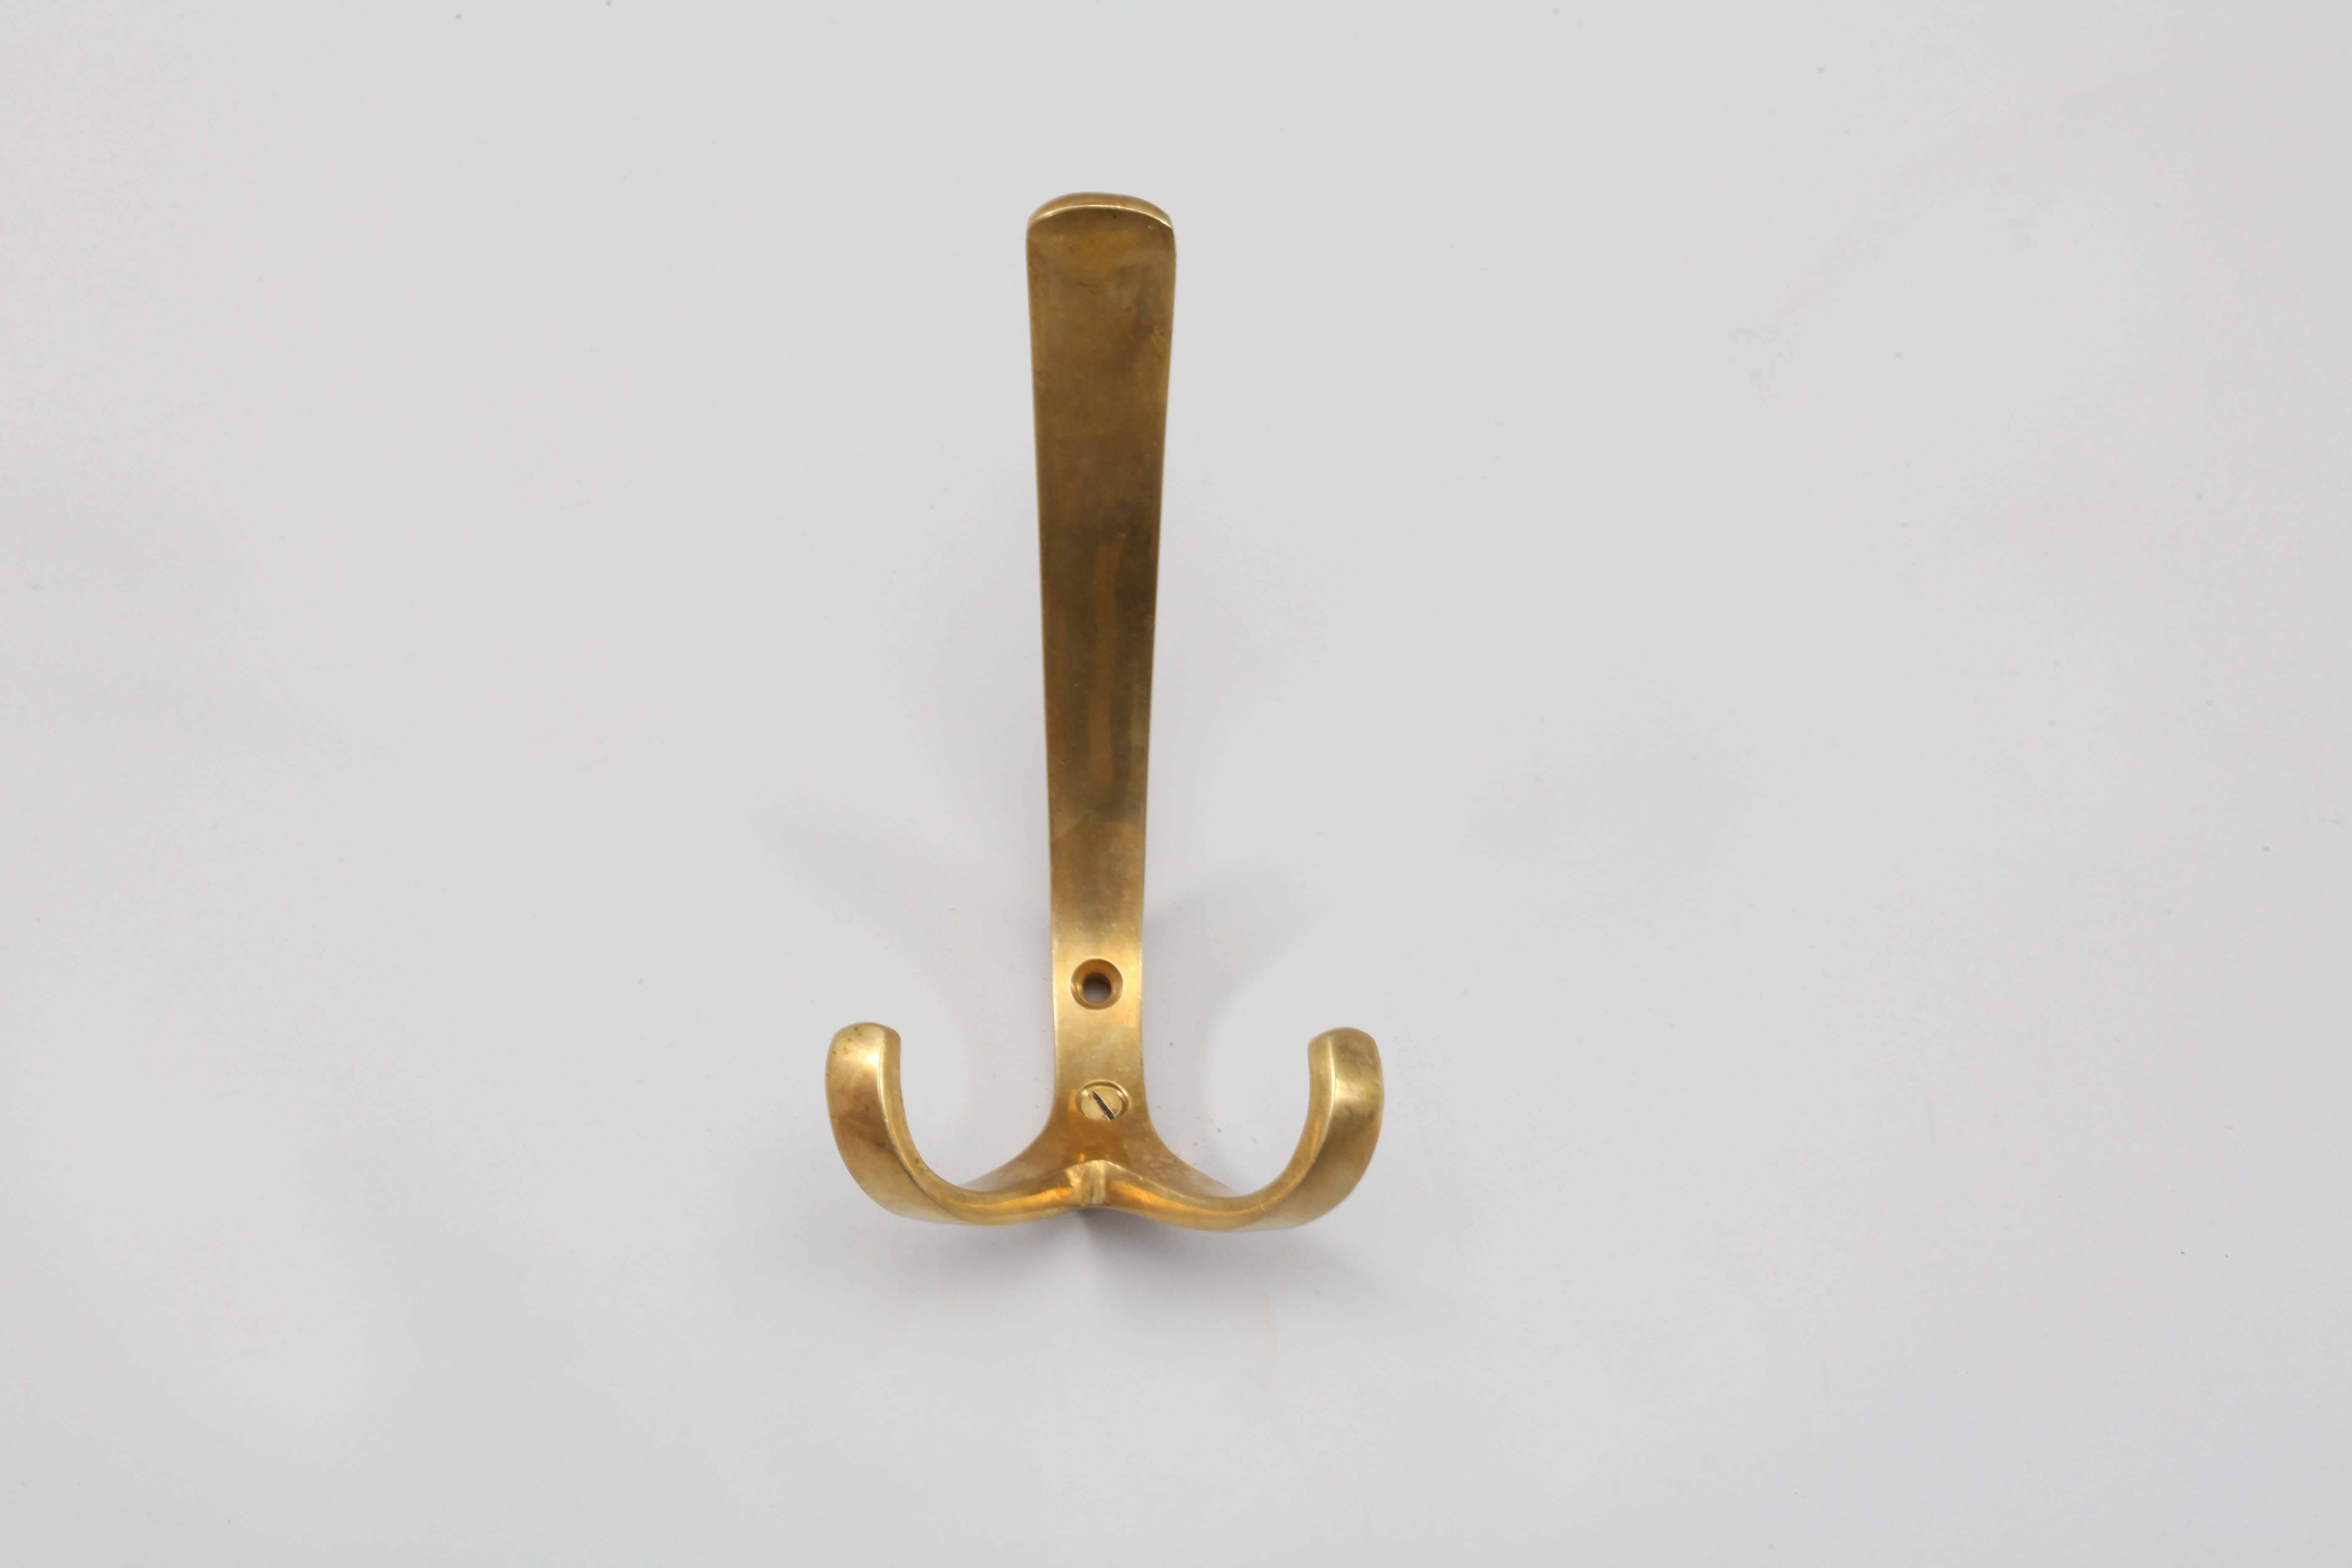 Five double hooks,
Carl Auböck,
Vienna, 1950.
Solid brass
All hooks coming with the fitting brass screws.
 